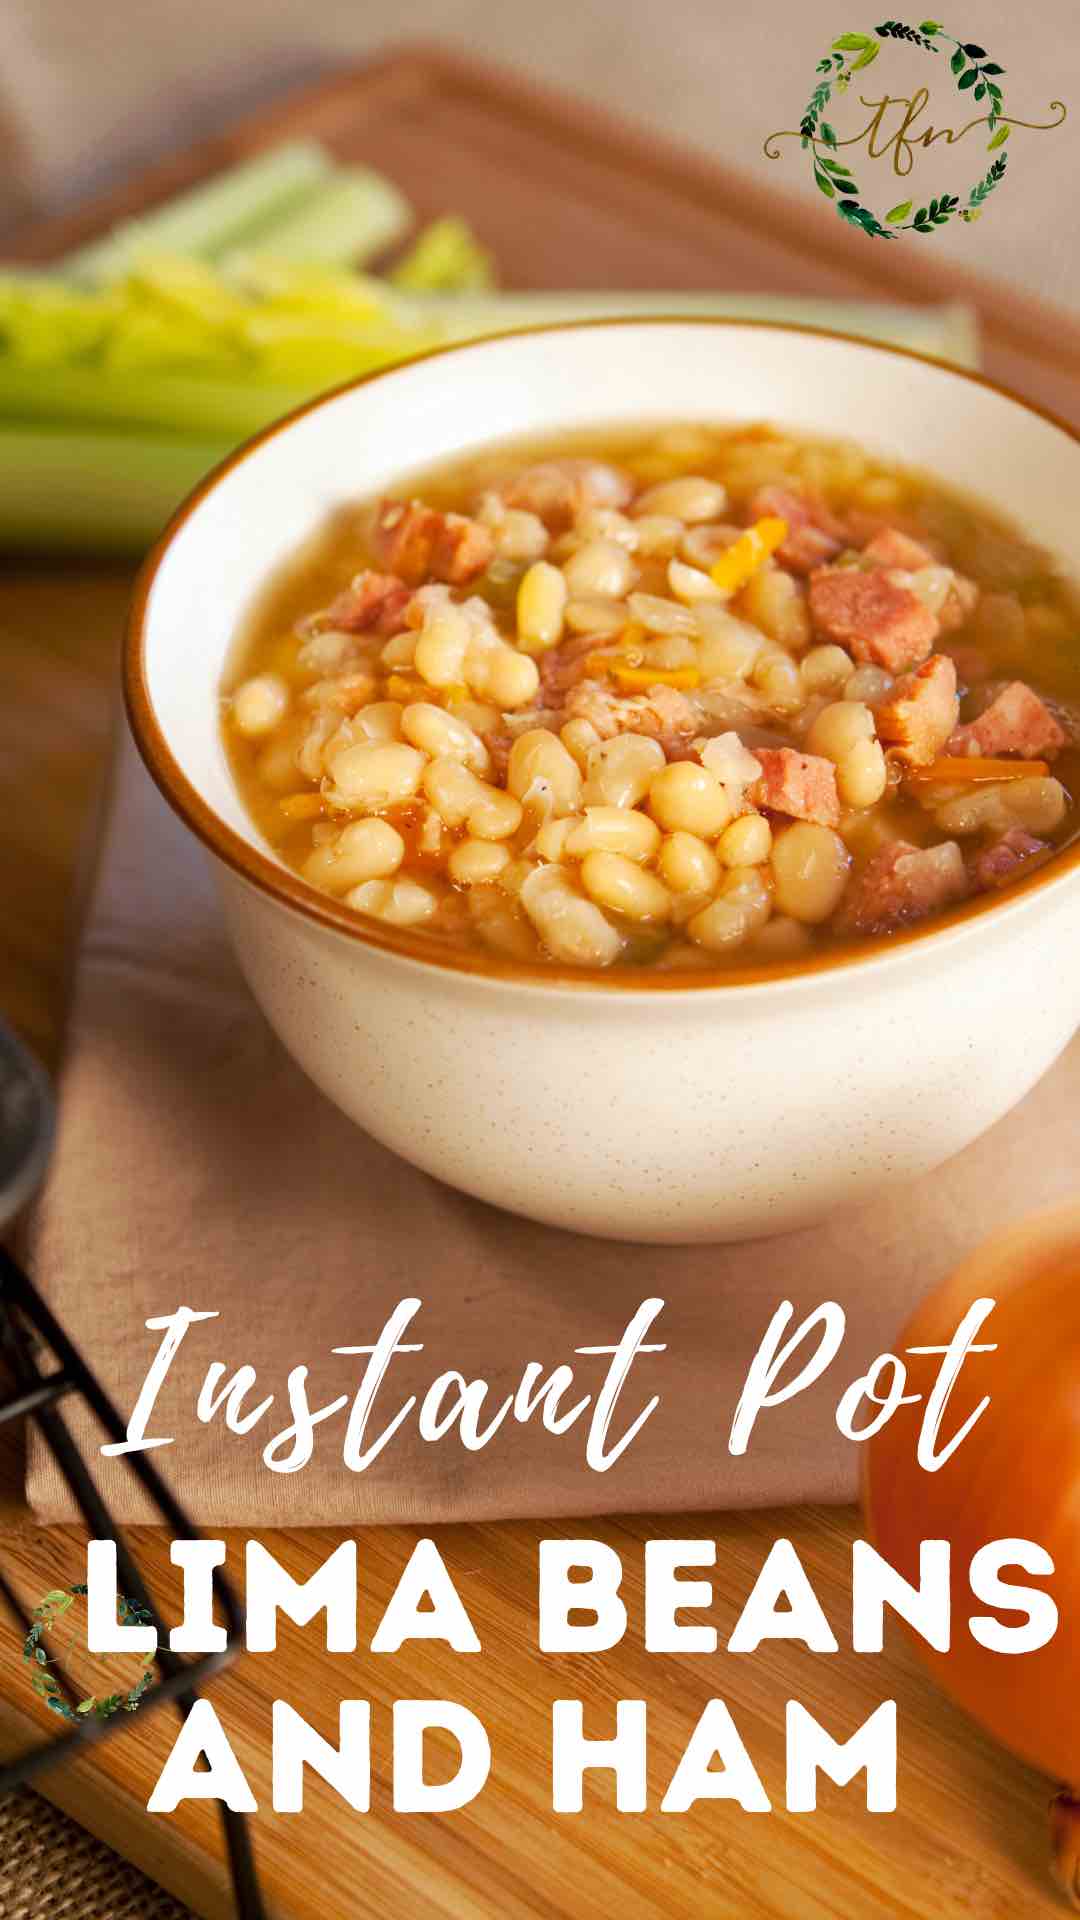 Bowl of Instant Pot Lima Beans and Ham made from dried or frozen lima beans.